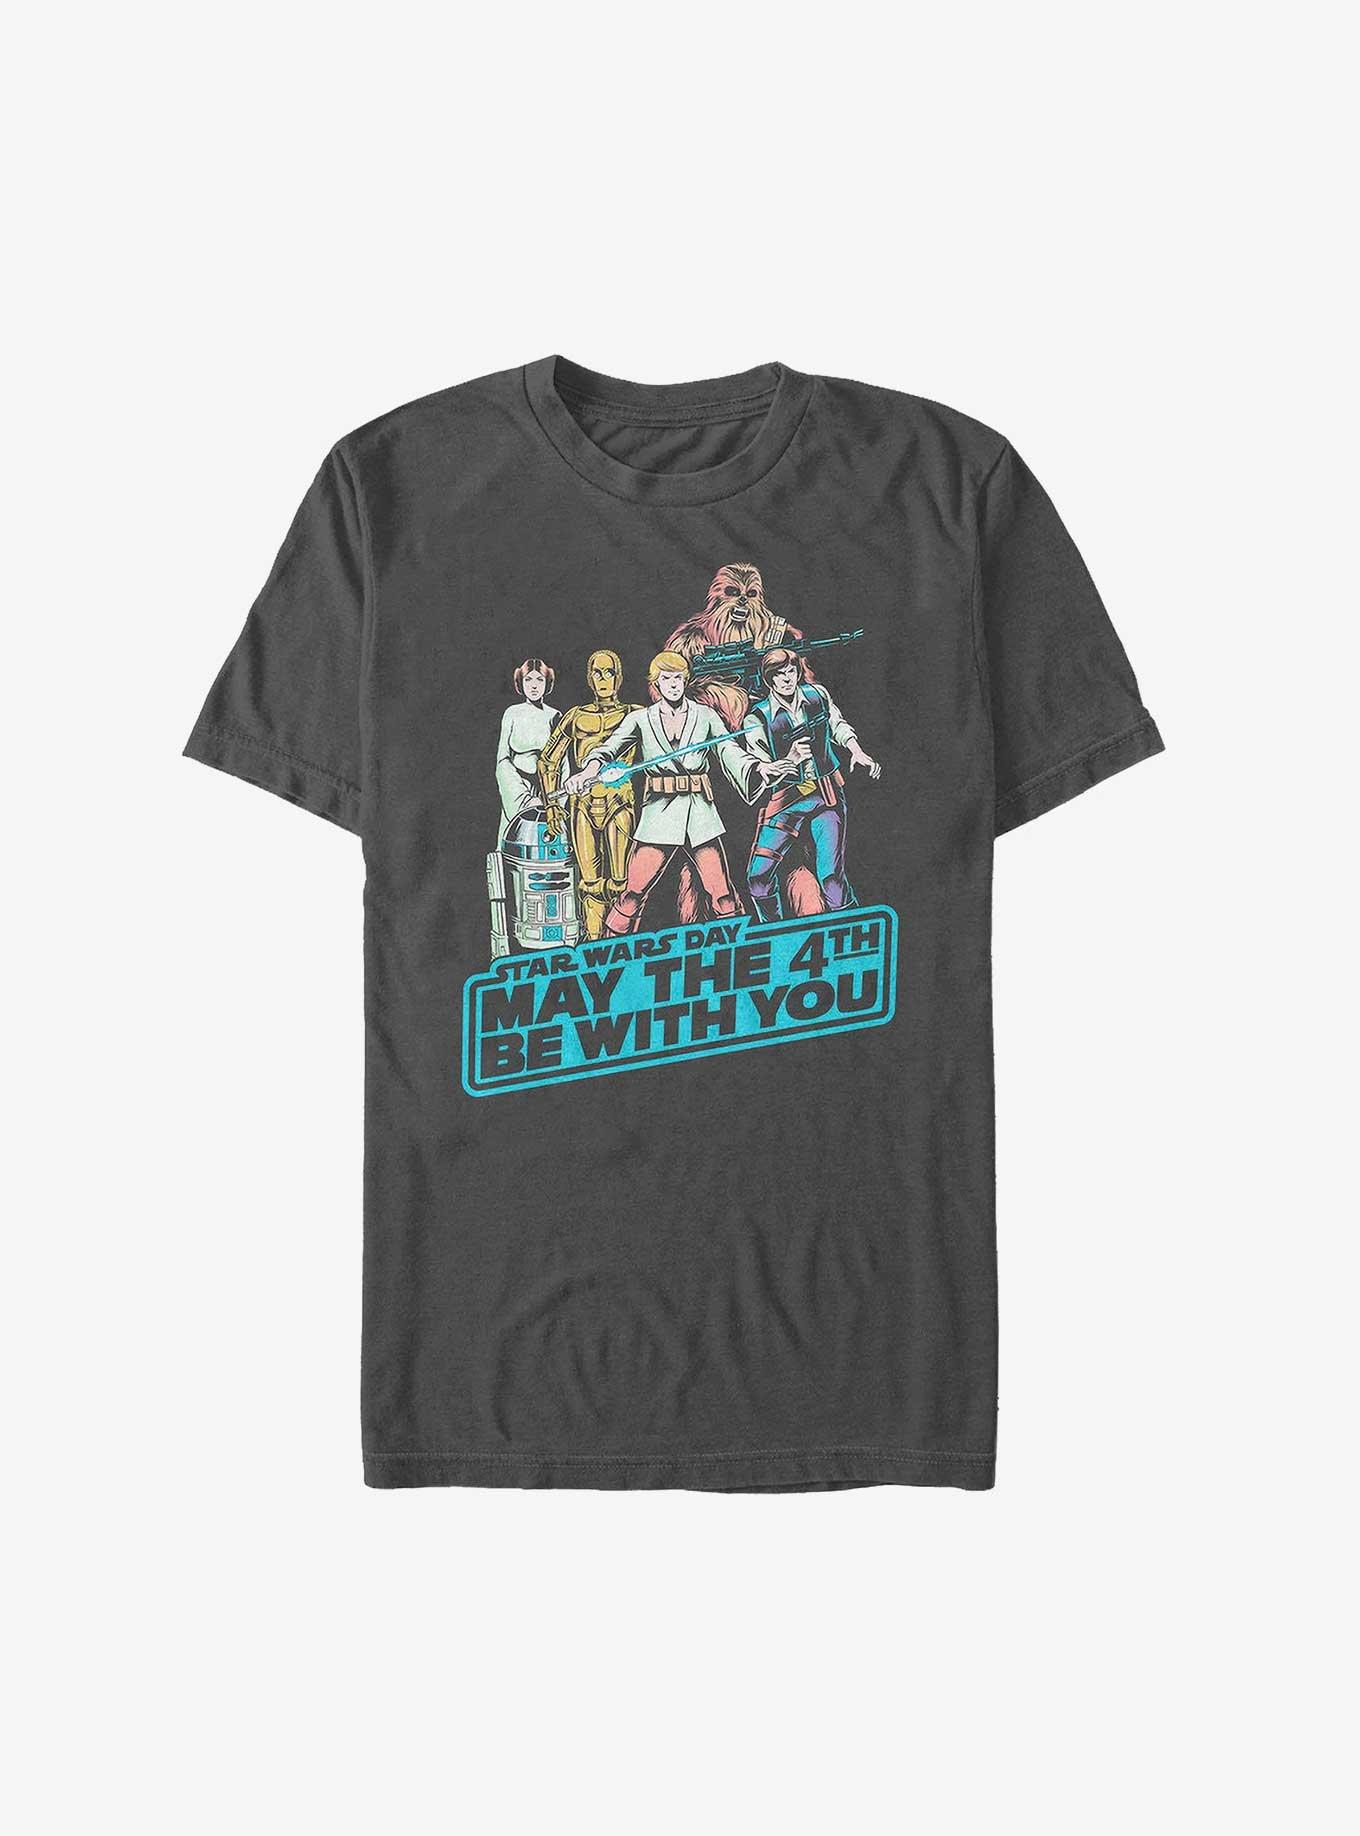 Star Wars May Fourth Group Extra Soft T-Shirt, CHARCOAL, hi-res